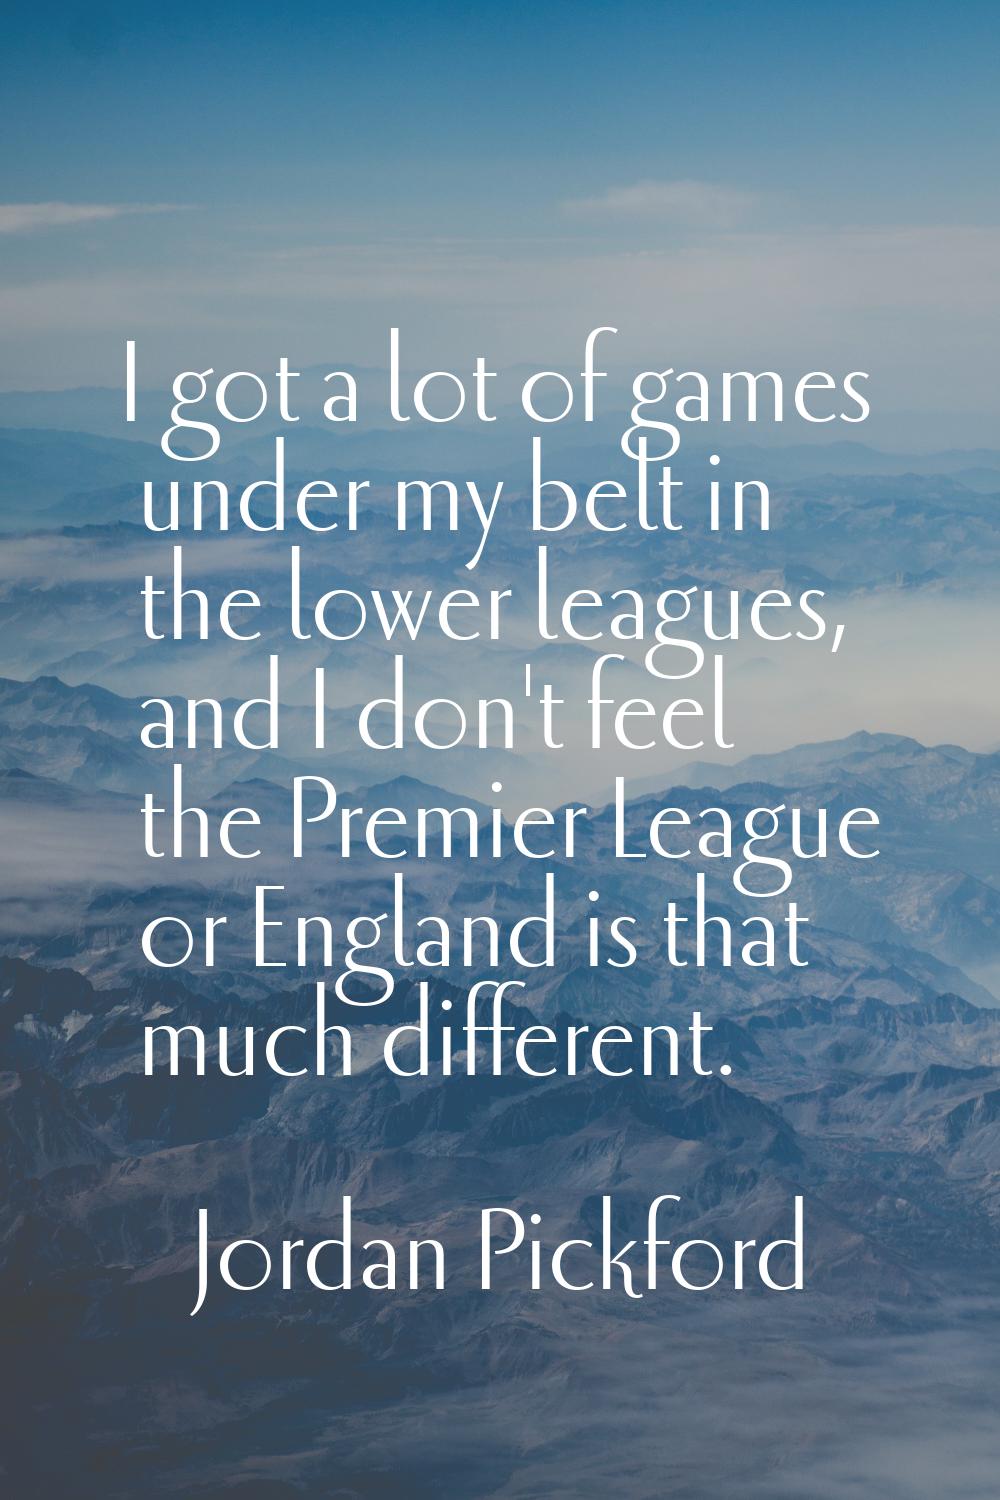 I got a lot of games under my belt in the lower leagues, and I don't feel the Premier League or Eng